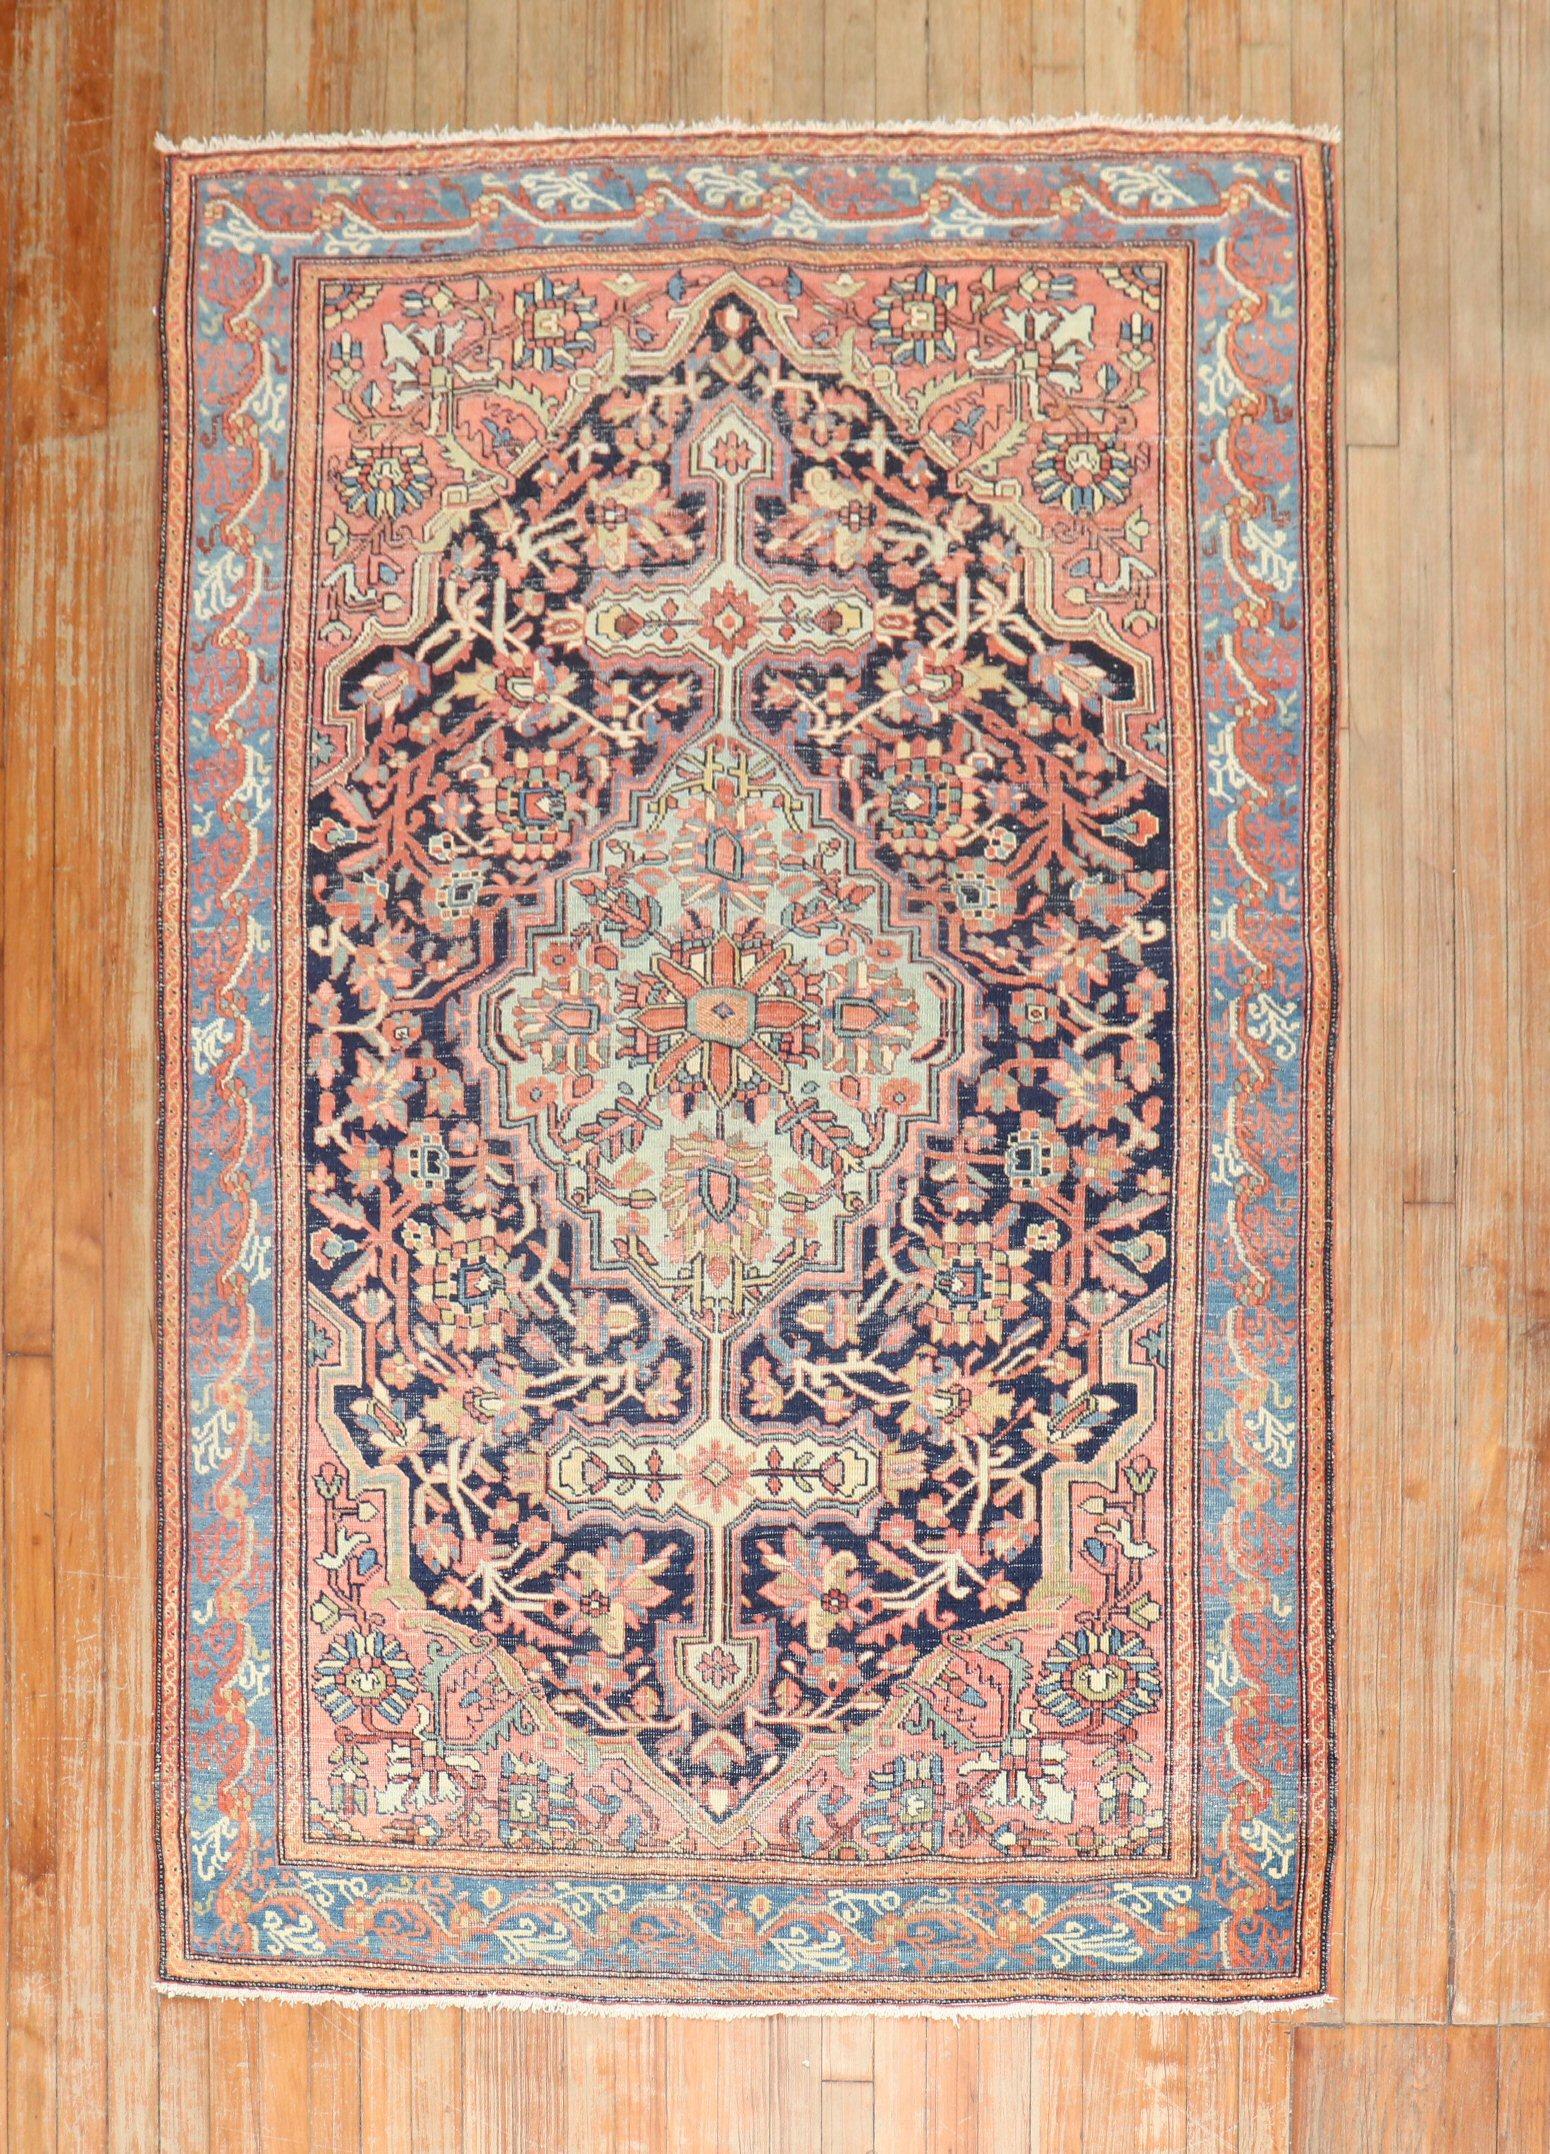 An authentic Persian Sarouk Farahan rug from the 2nd quarter of the 20th century with a traditional medallion border design

Measures: 4'4'' x 6'10''